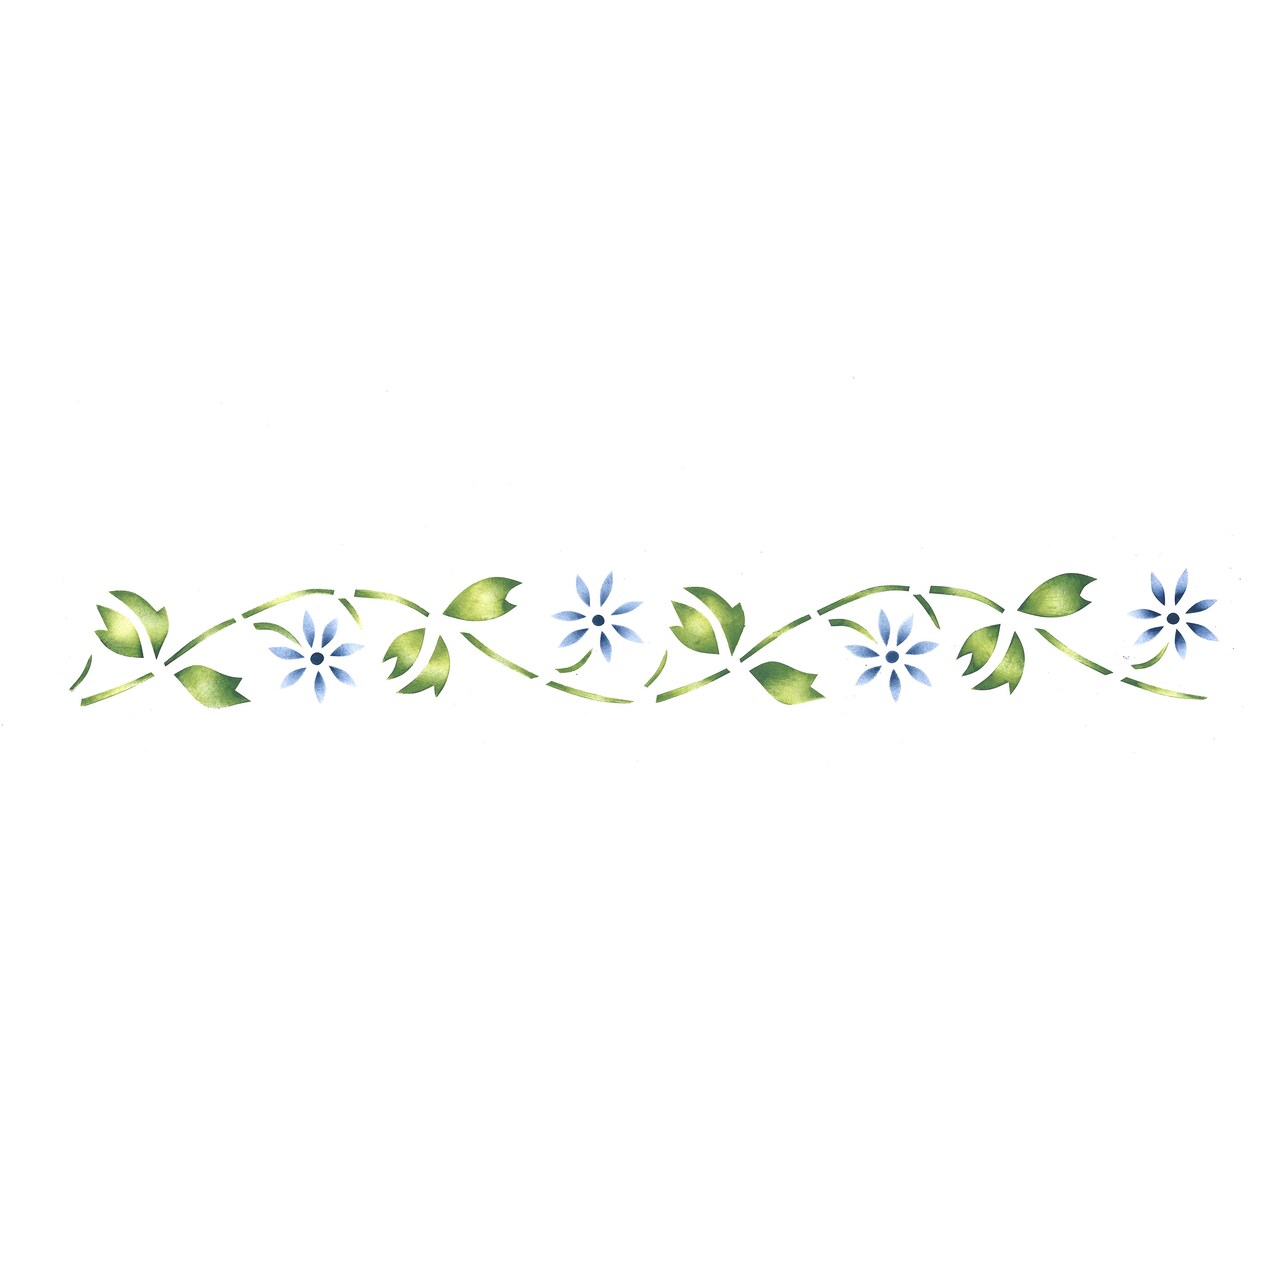 Small Floral Wall Stencil Border | 016 by Designer Stencils | Floral  Stencils | Reusable Art Craft Stencils for Painting on Walls, Canvas, Wood  